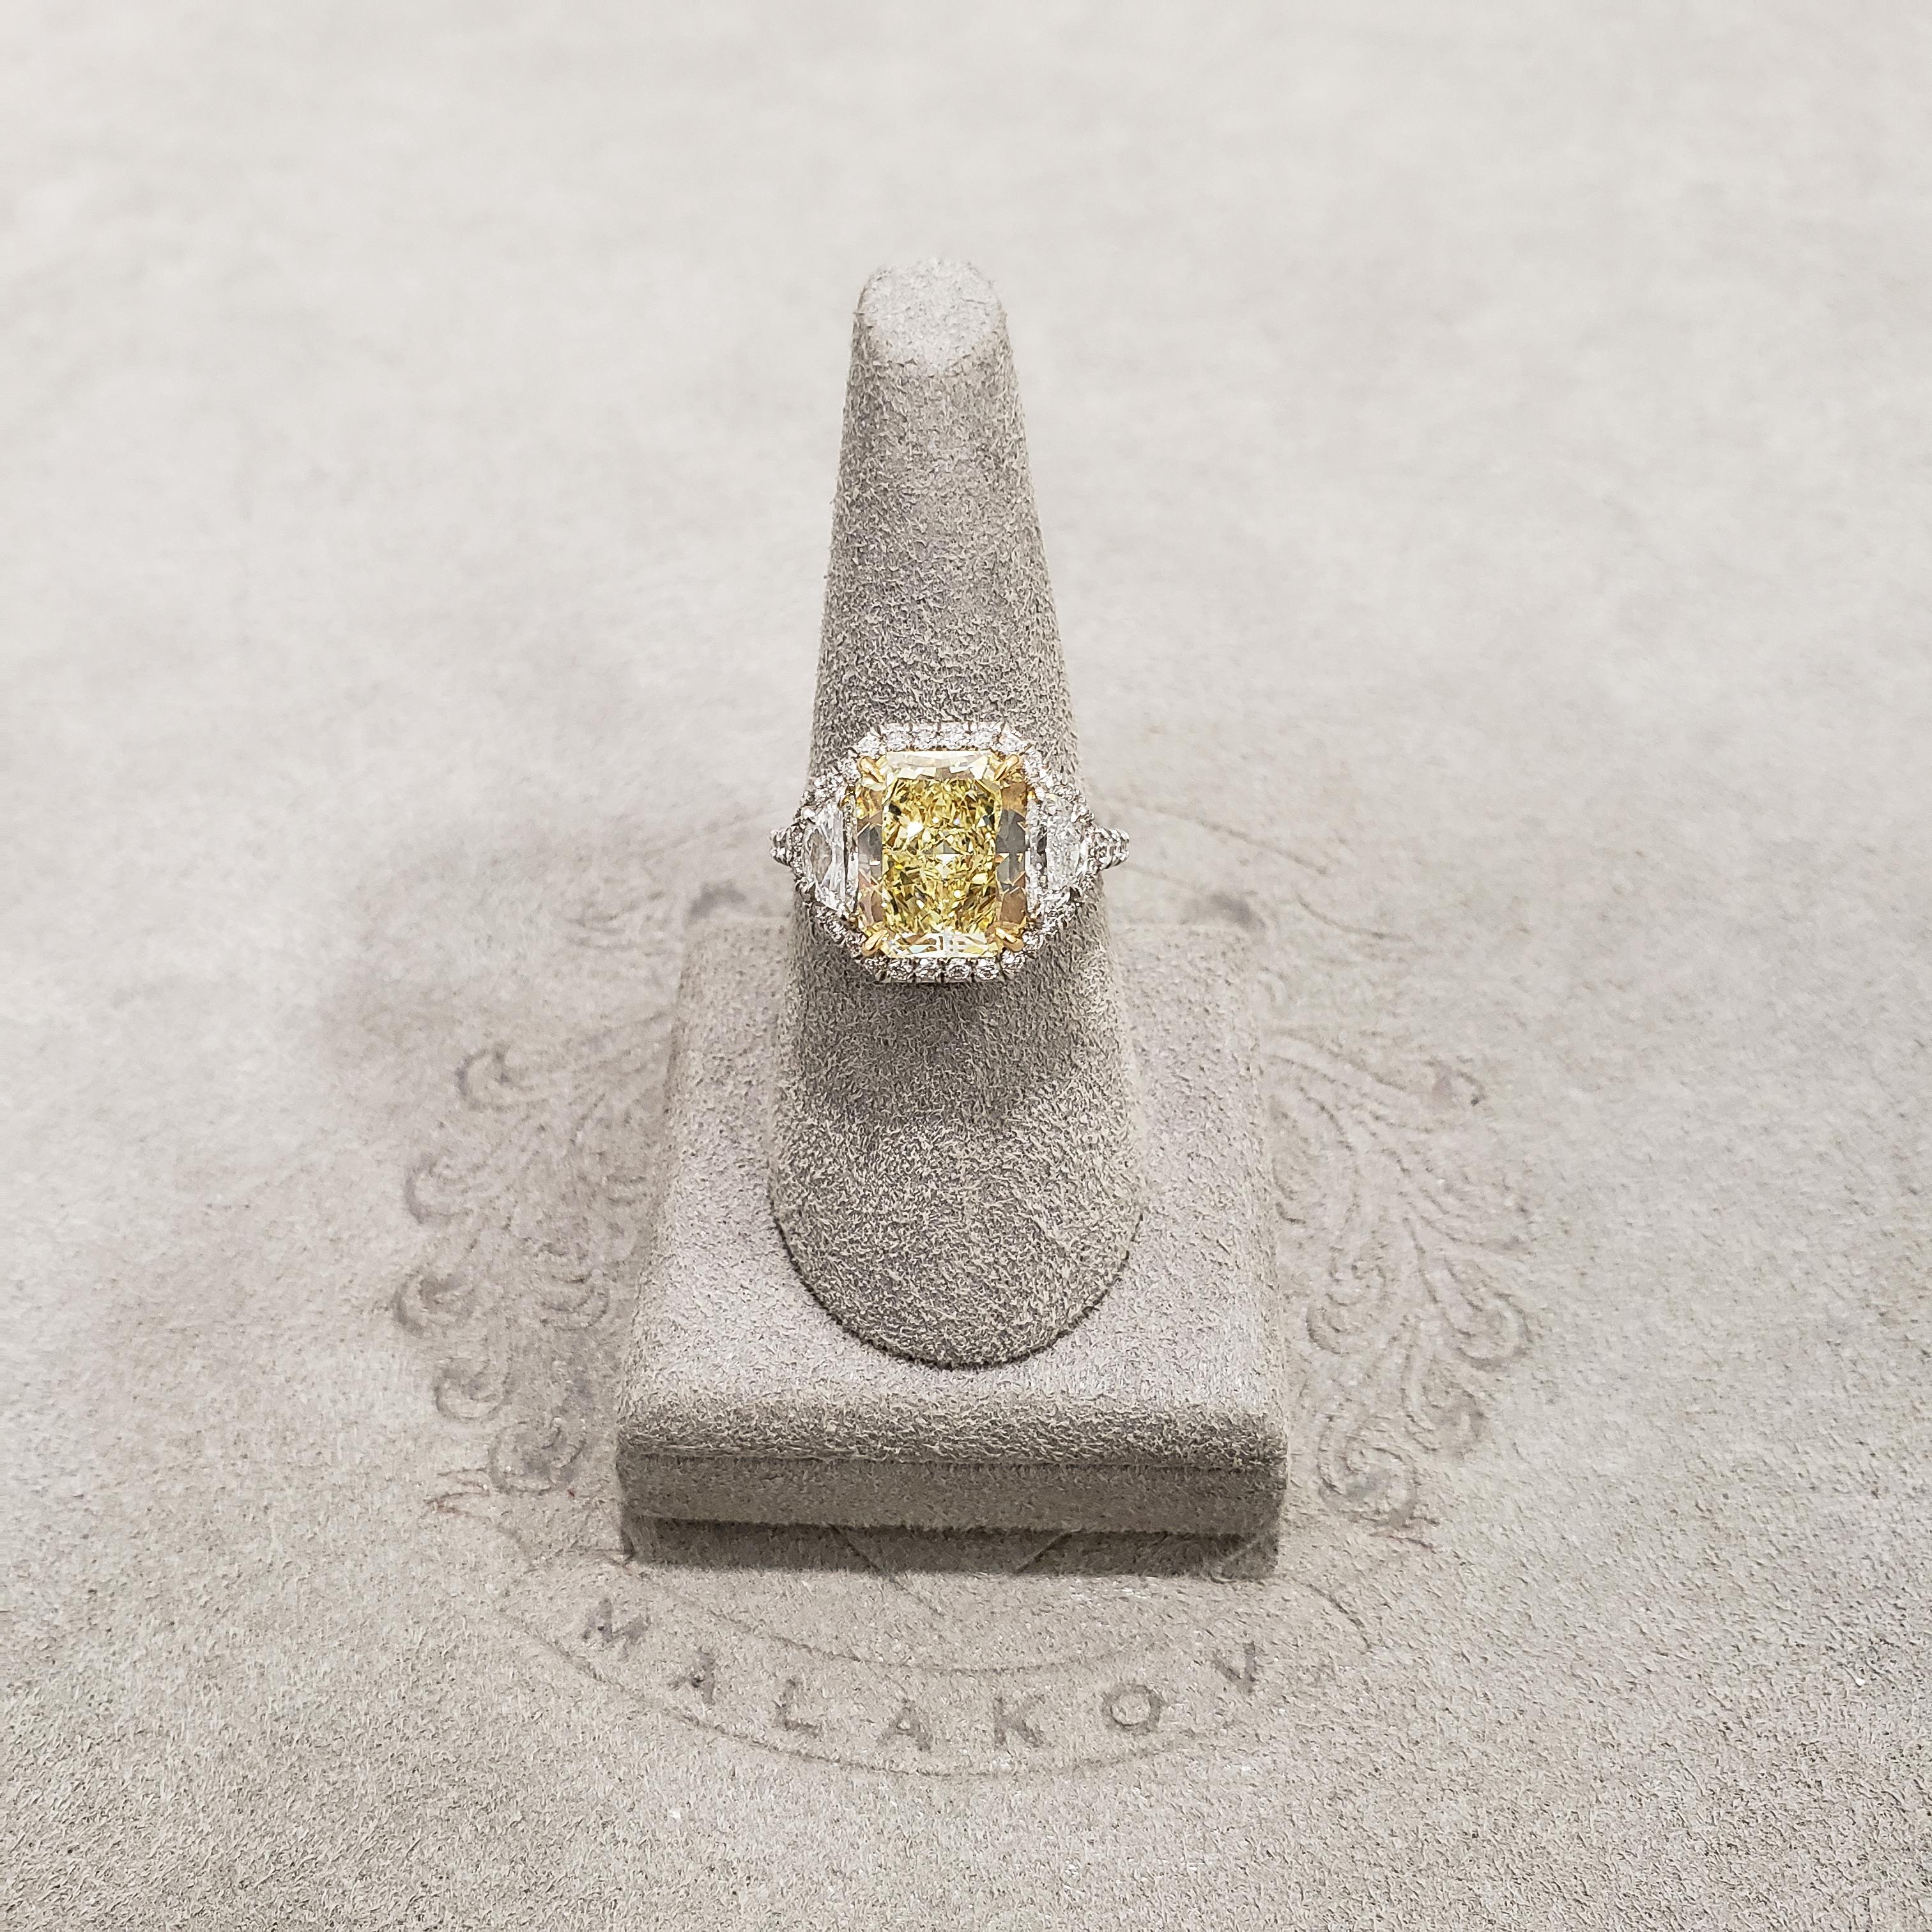 Showcasing a 3.64 carat radiant cut yellow diamond, flanked by half moon diamonds weighing 0.68 carats total. Set in an everlasting platinum mounting accented with round brilliant diamonds. GIA certified the center diamond as Fancy Yellow Color, VS2